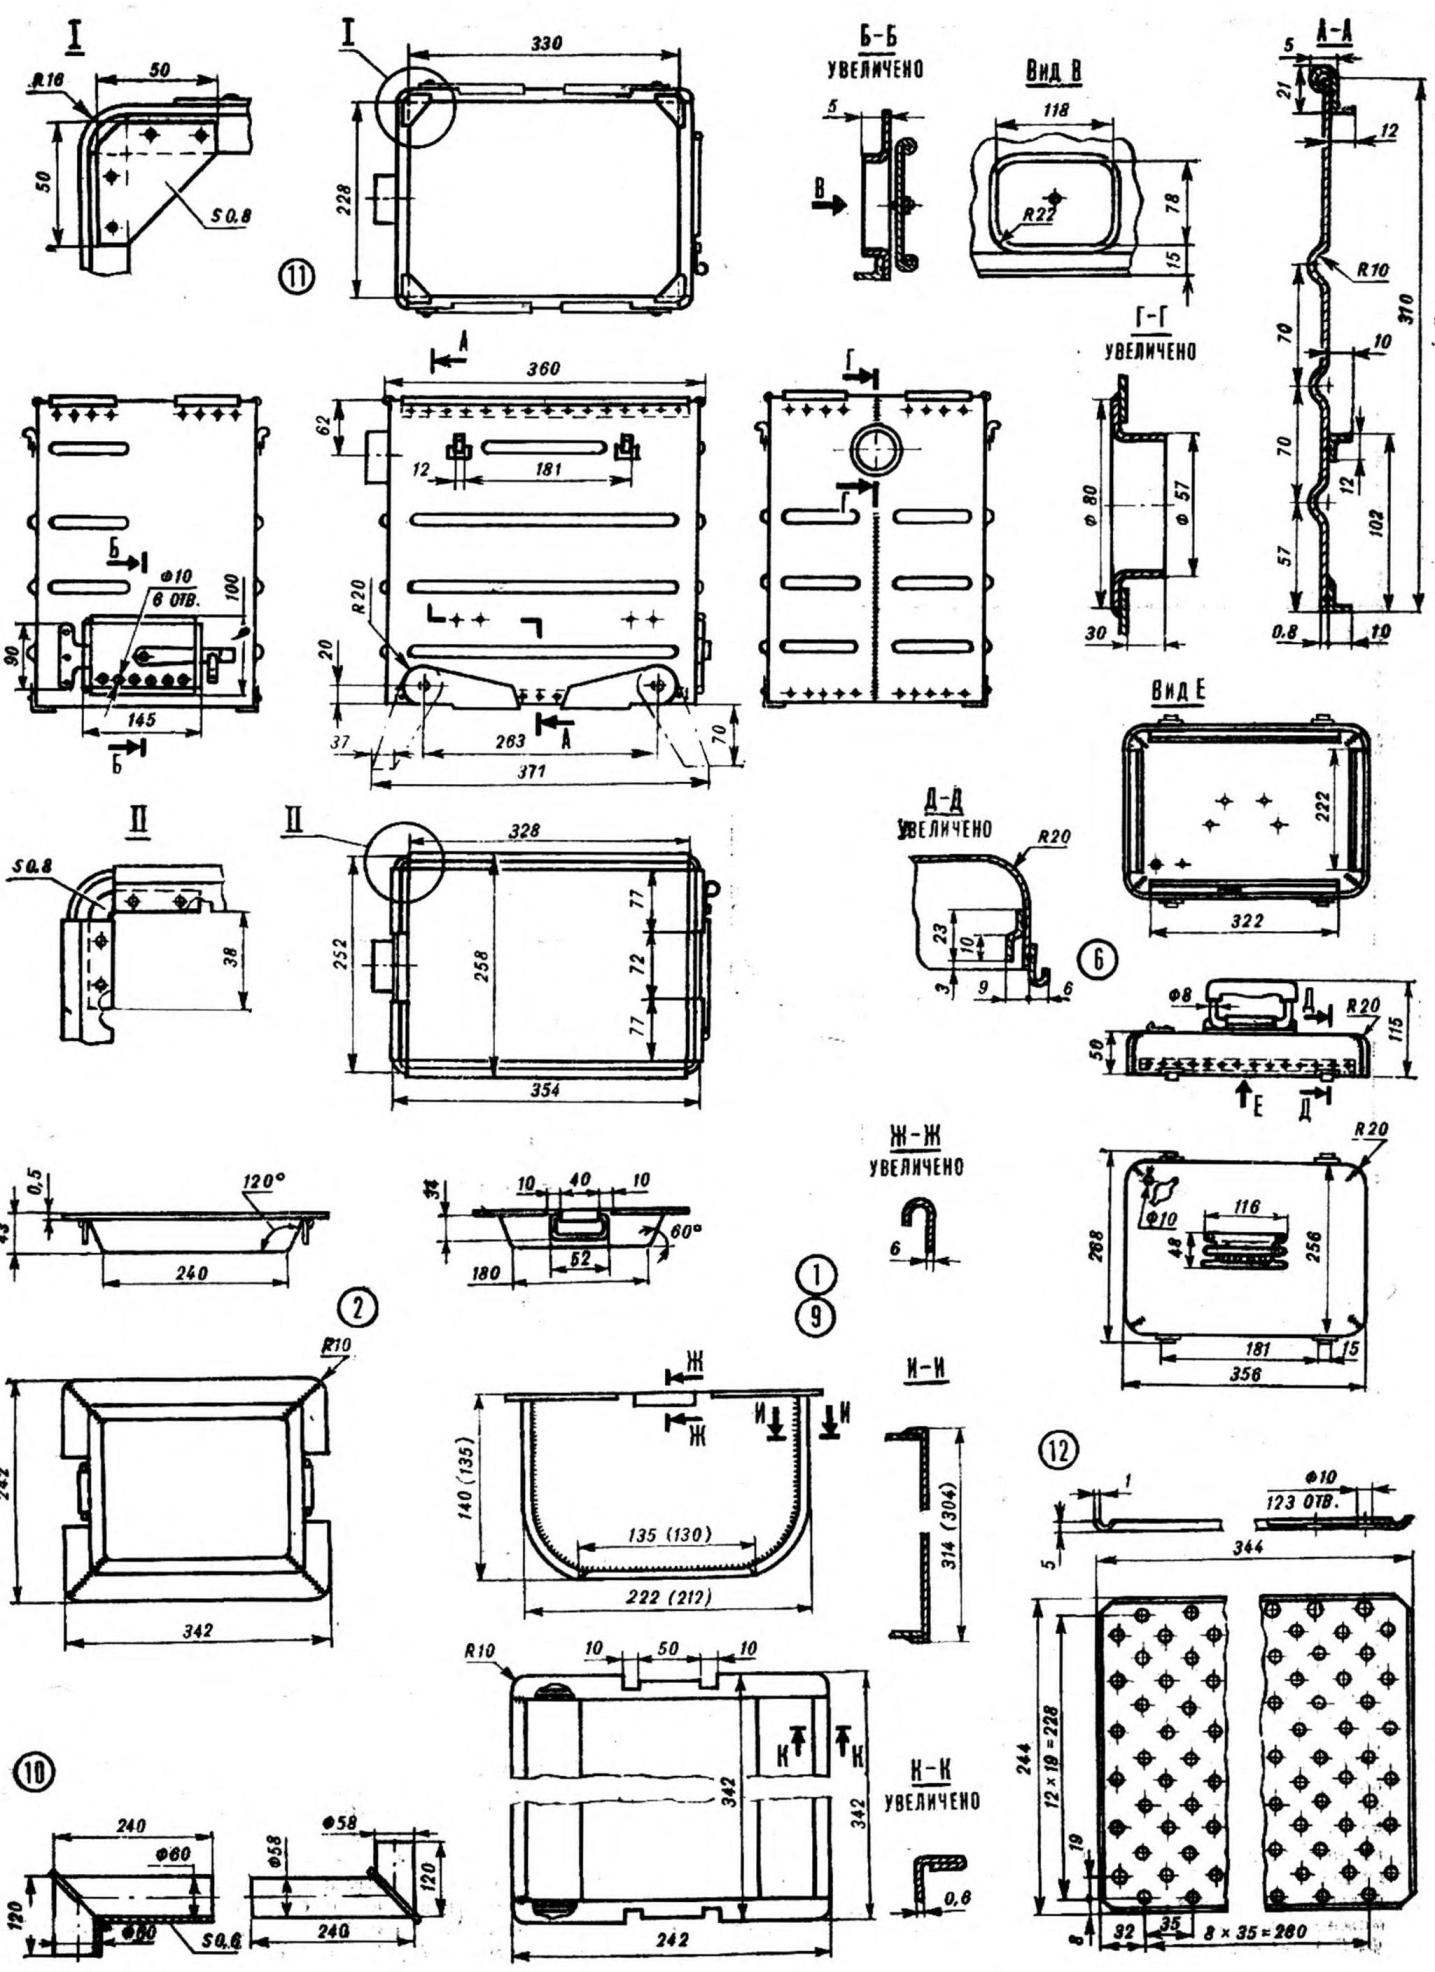 Drawings for the manufacture of miracle-stove for simplified technology.